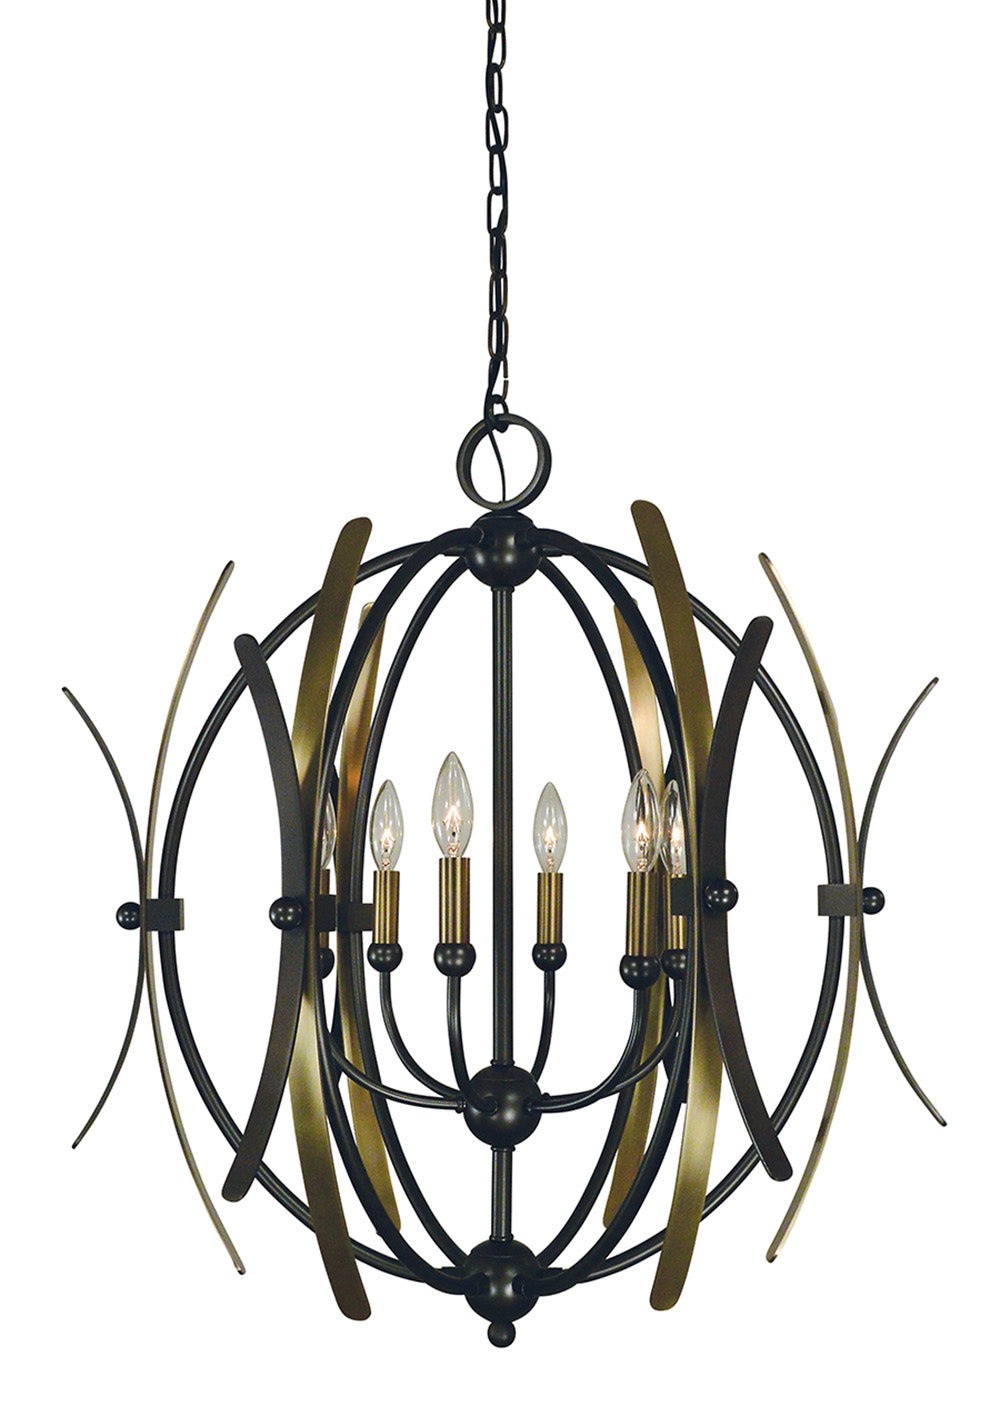 Framburg Monique 6 - Light Mahogany Bronze with Antique Brass Accents Chandelier 5055 MB/AB